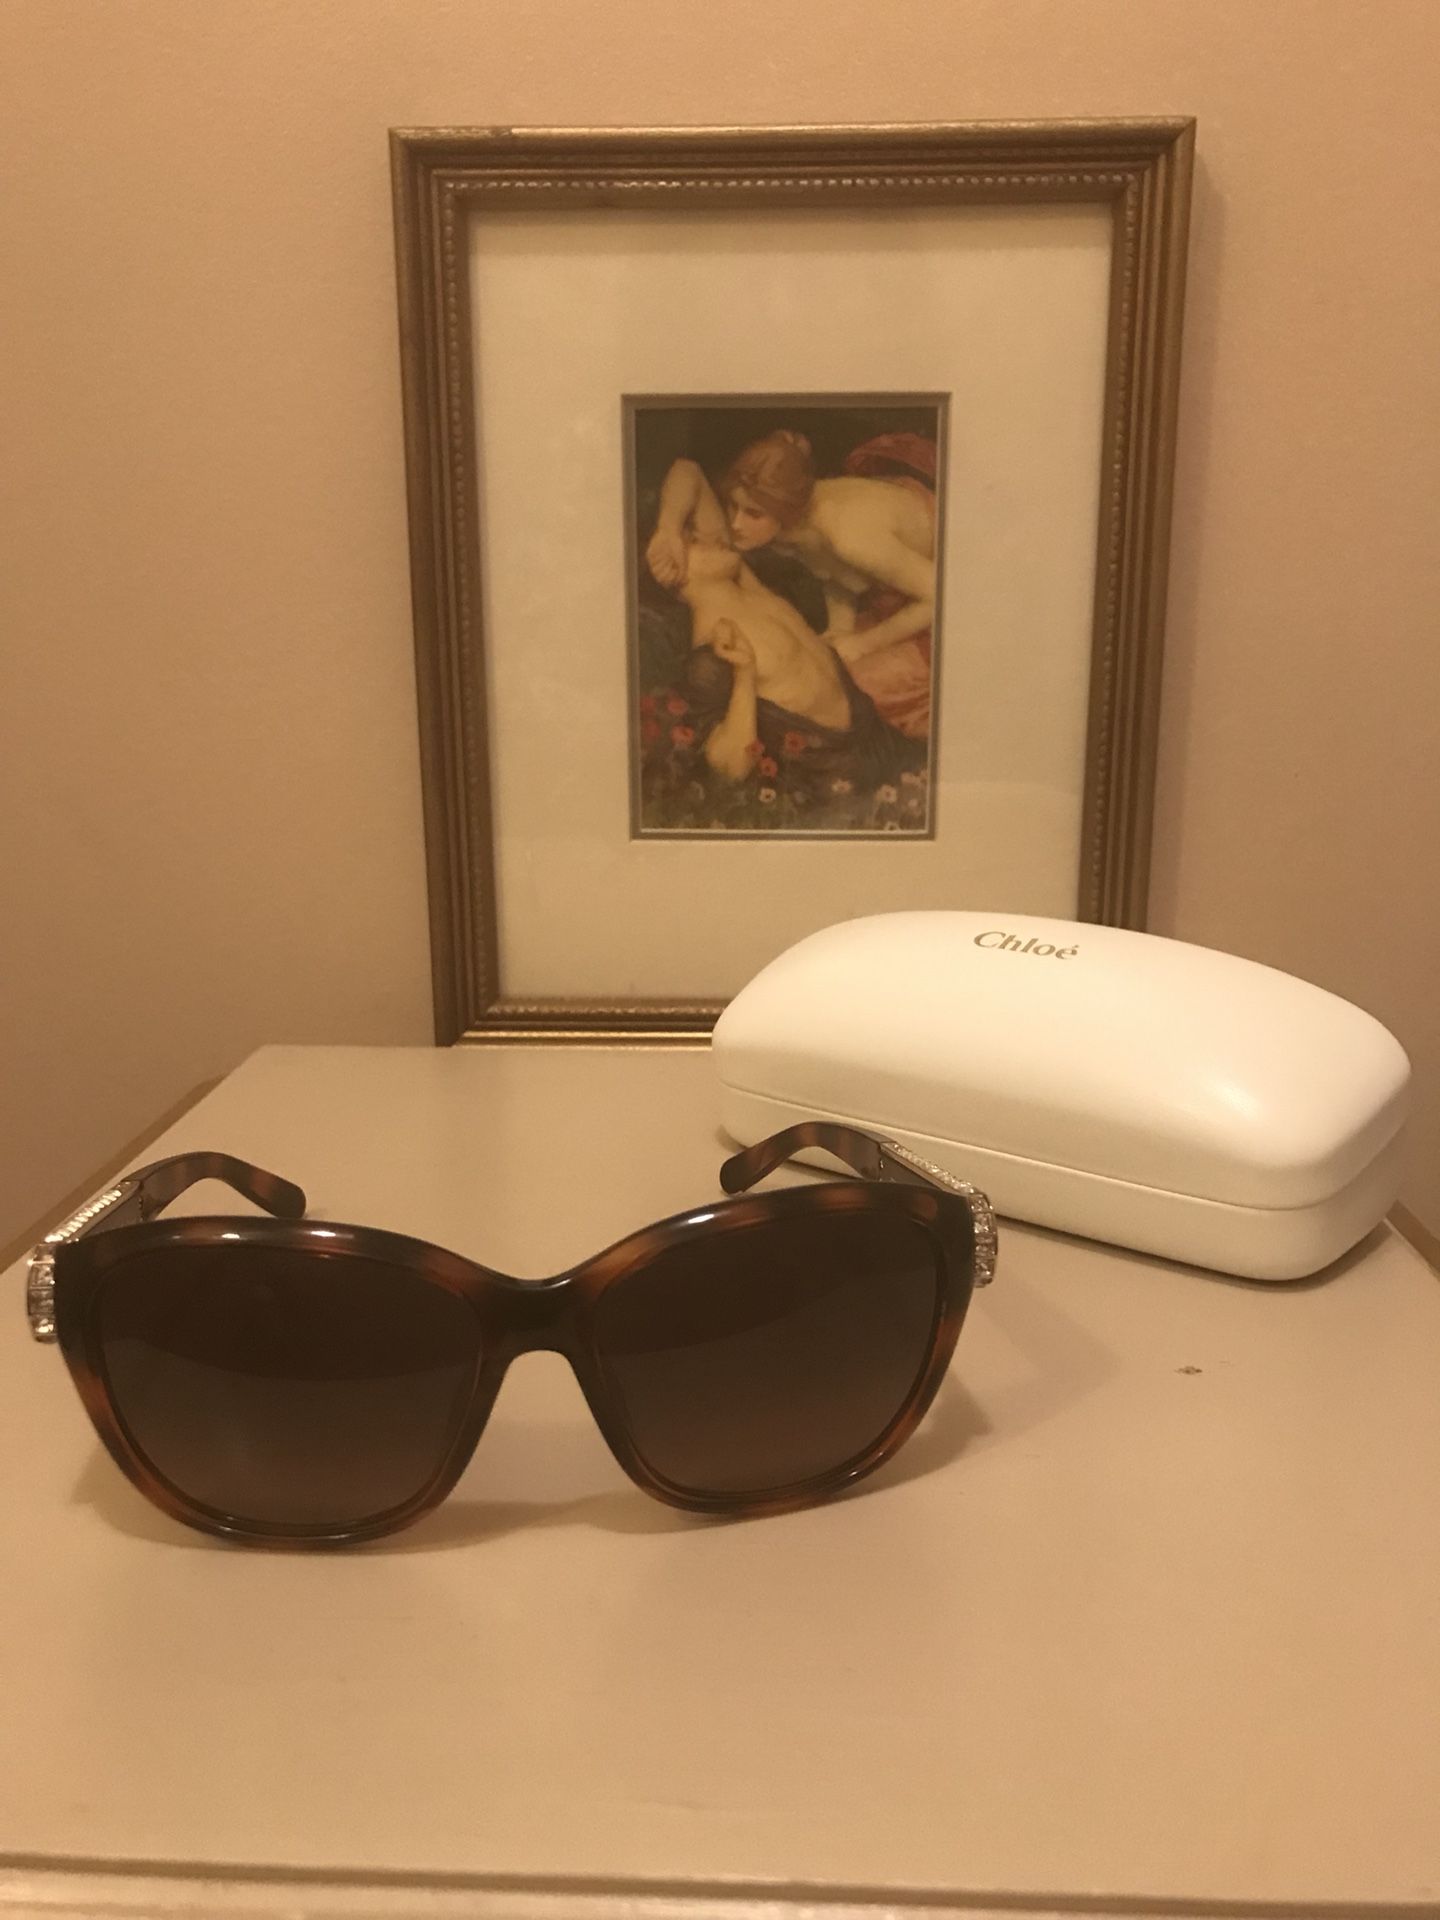 Chloe stunning sunglasses, brand new not ever worn with paper work and case as well as original box from a smoke free Home only taken out for picture